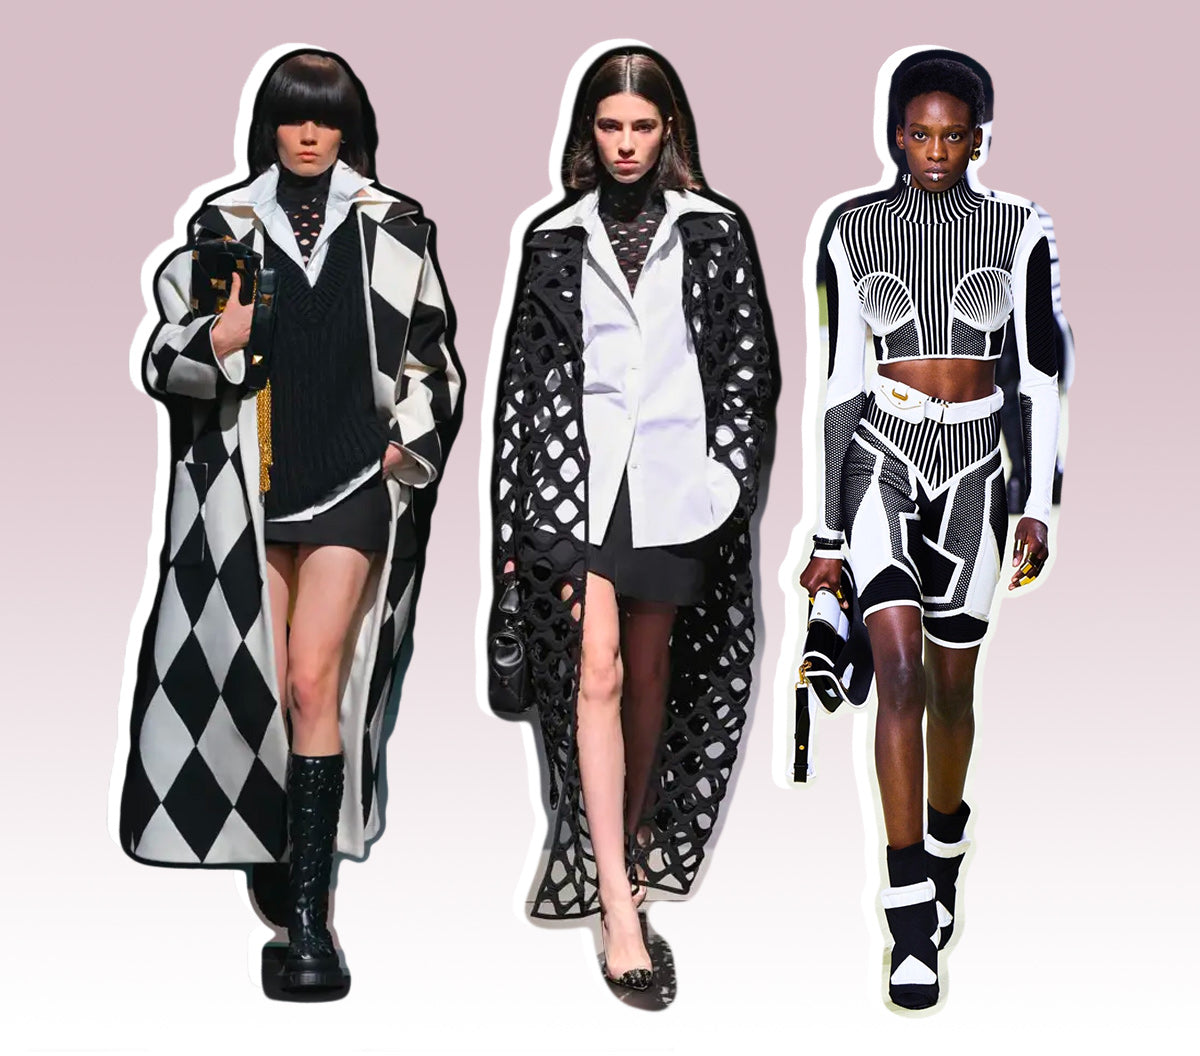 Shop Trending Black & White Styles at French Cuff Boutique | Fall/Winter 2022 Fashion Trends